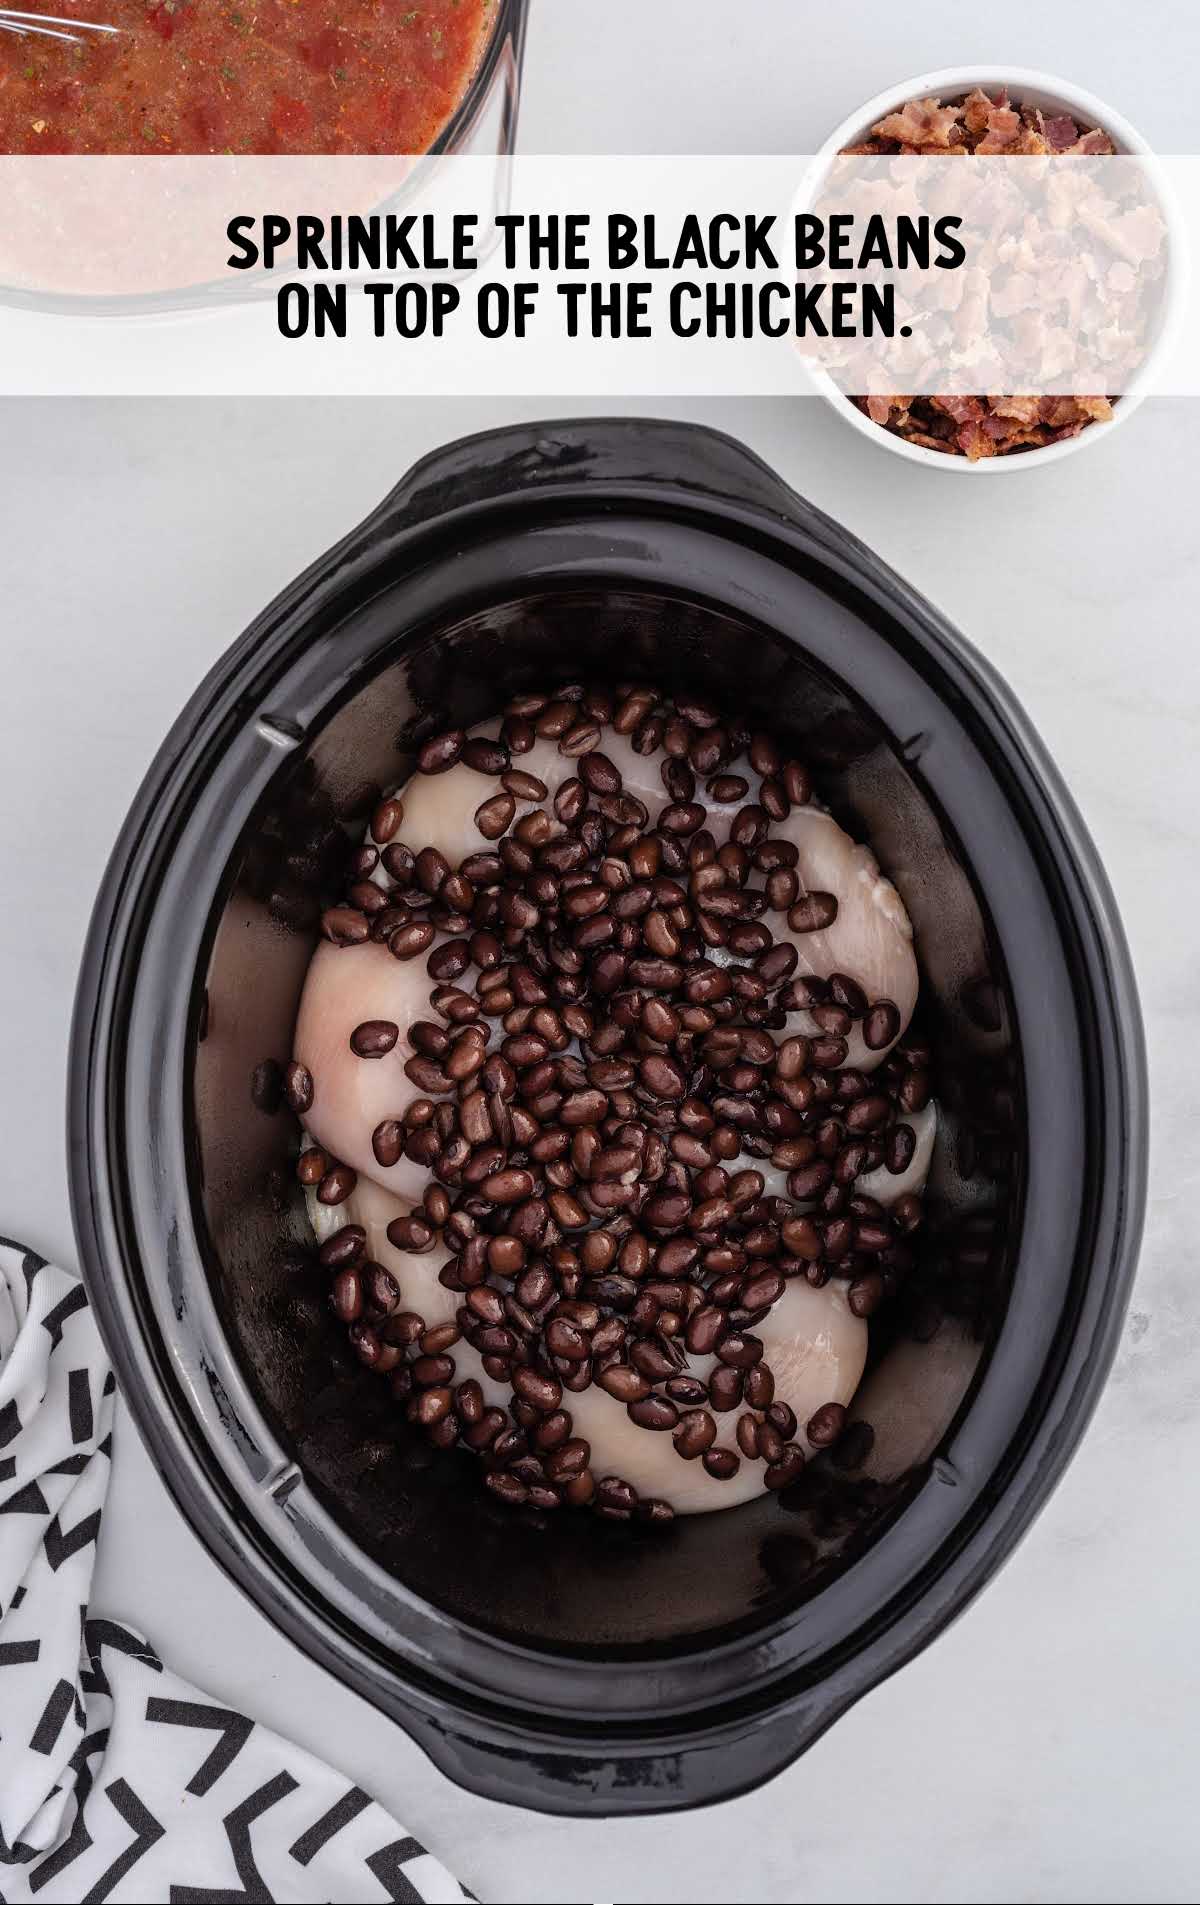 black beans sprinkled on top of the chicken in a crock pot